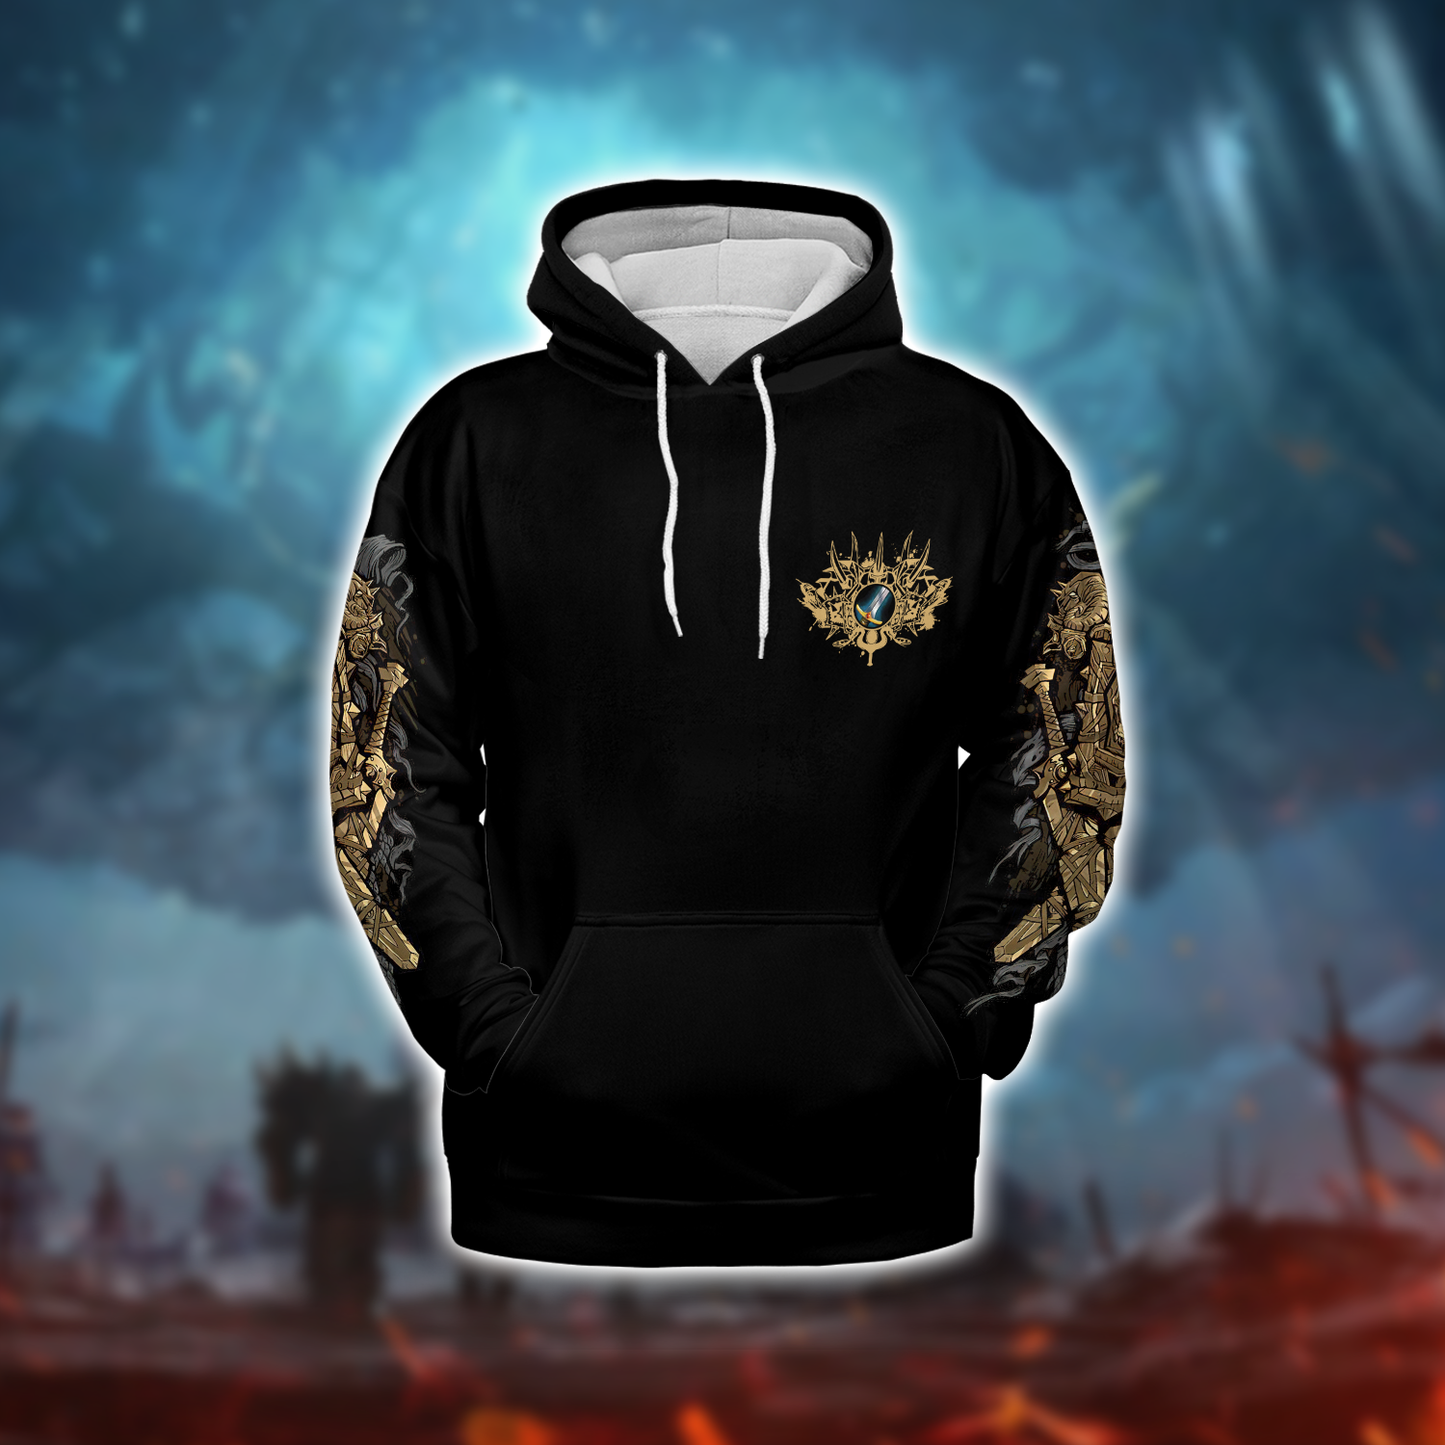 Protection Warrior WoW Class Guide V1 AOP Hoodie